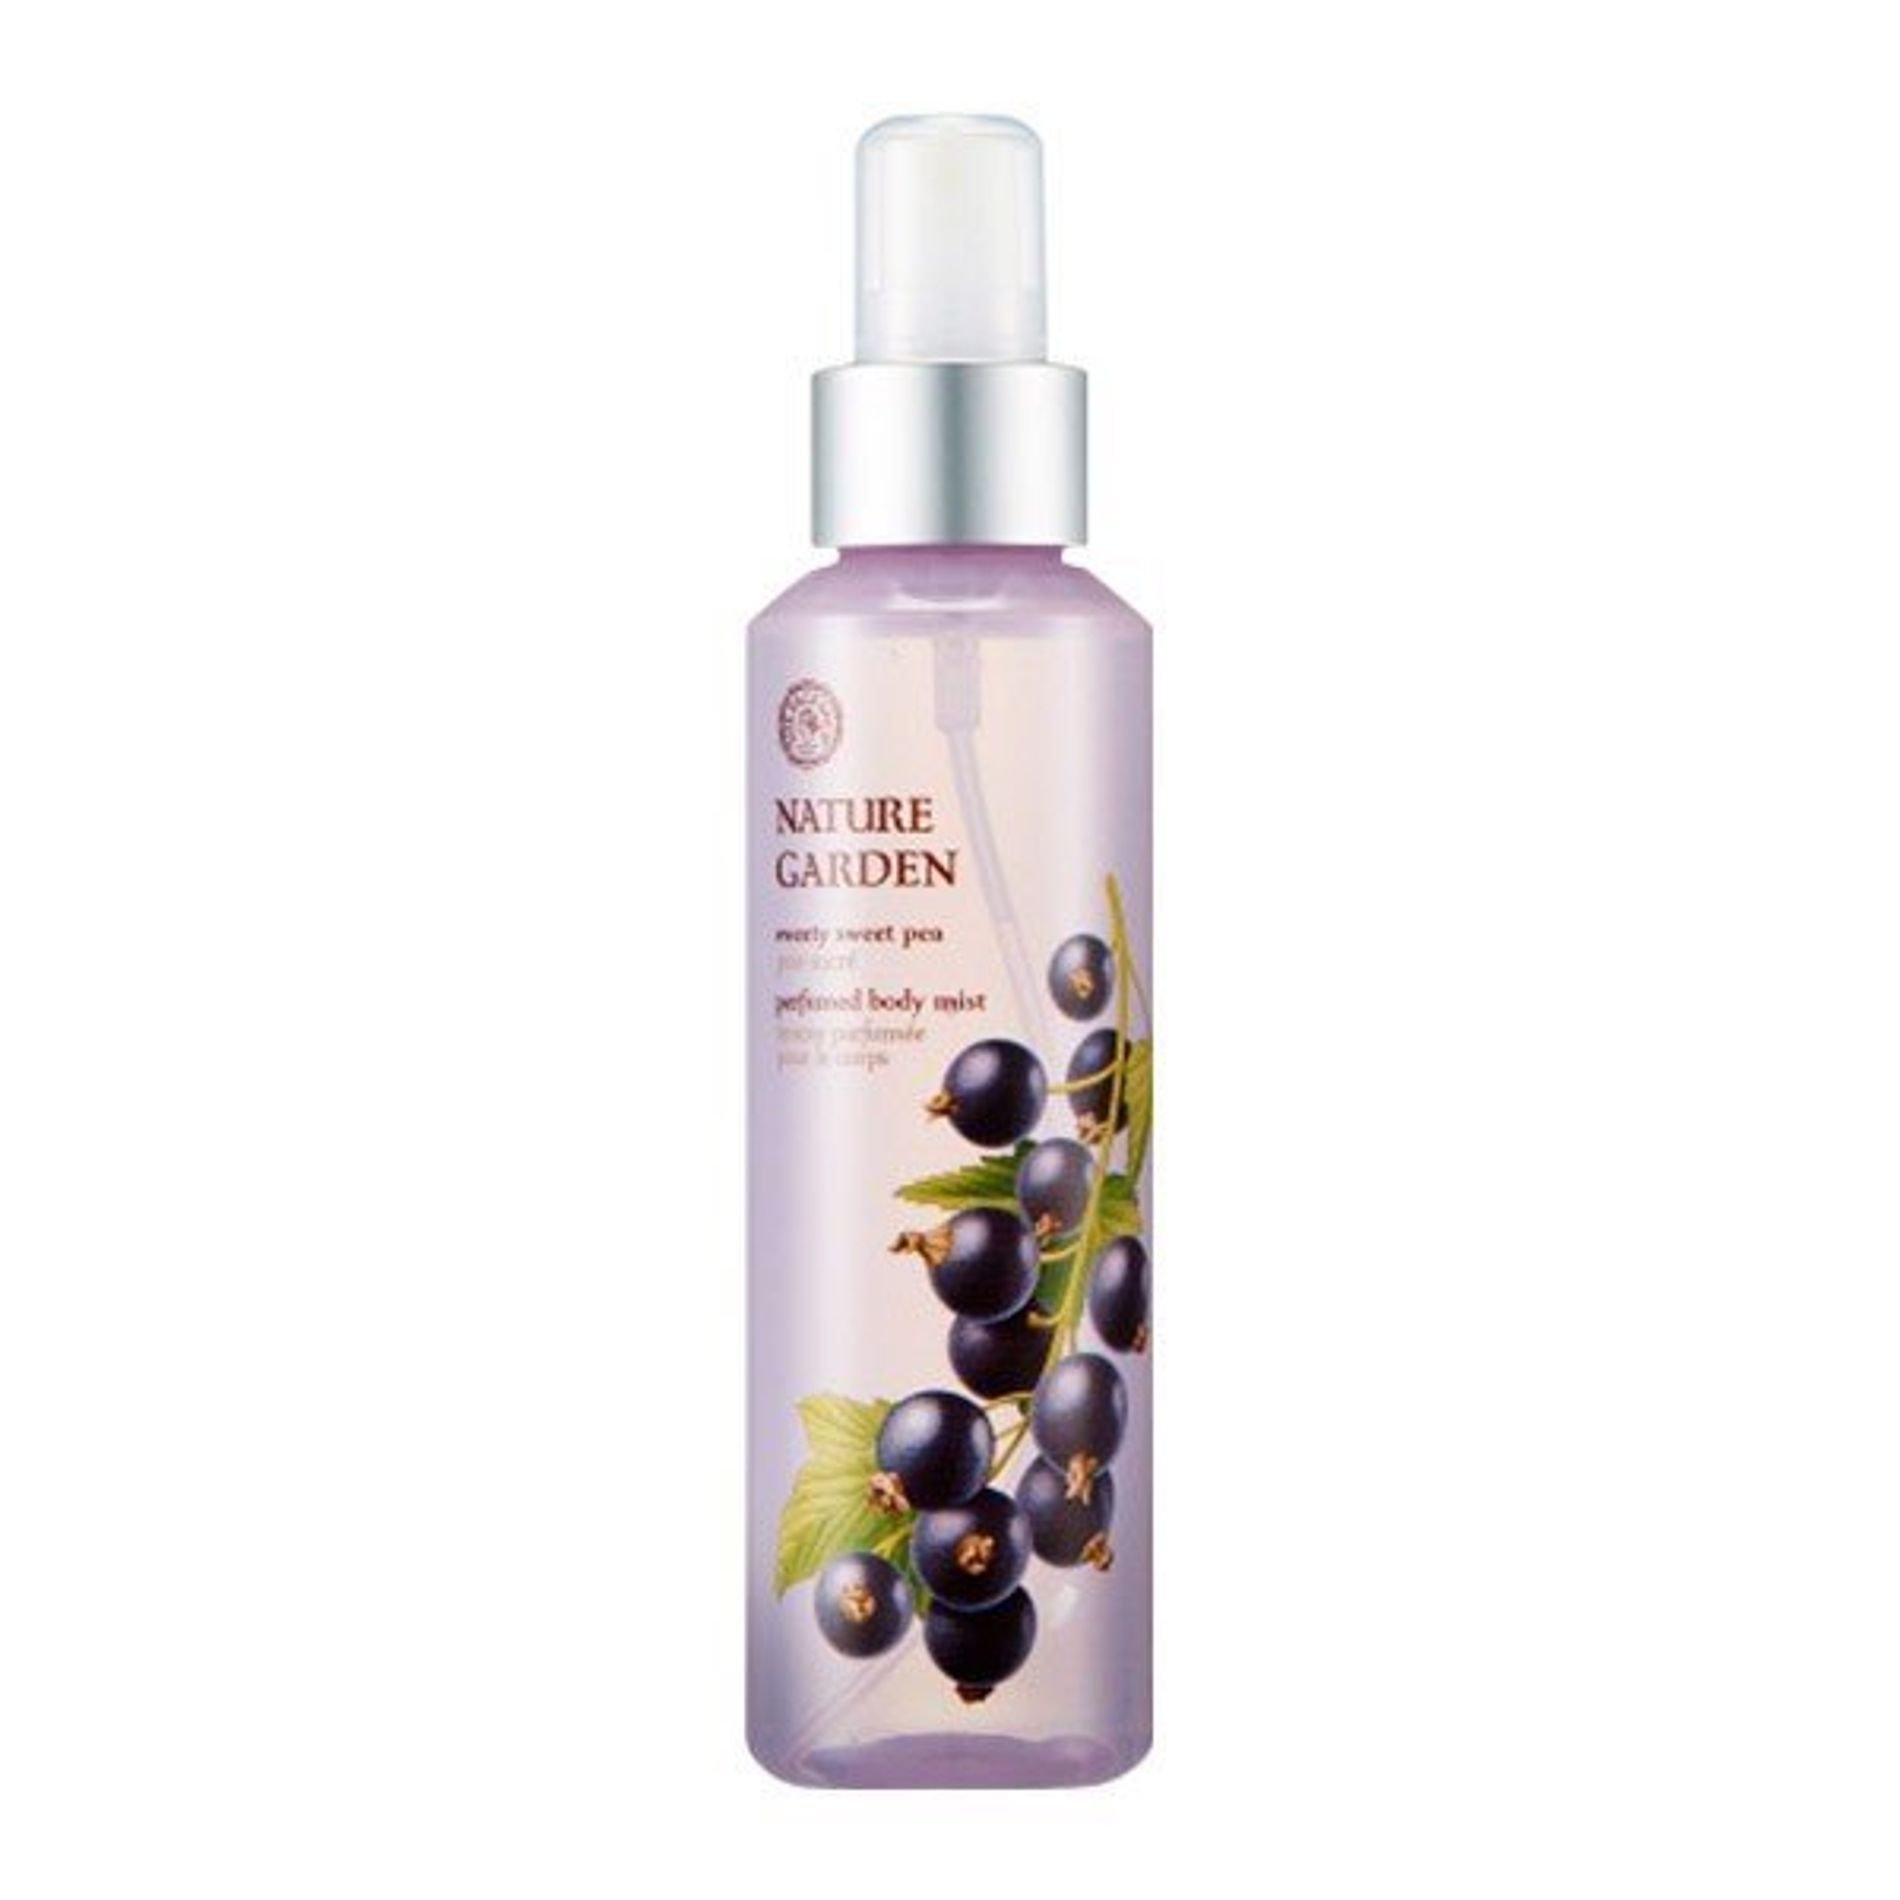 xit-duong-the-thefaceshop-nature-garden-sweety-sweet-pea-perfumed-body-mist-155ml-2